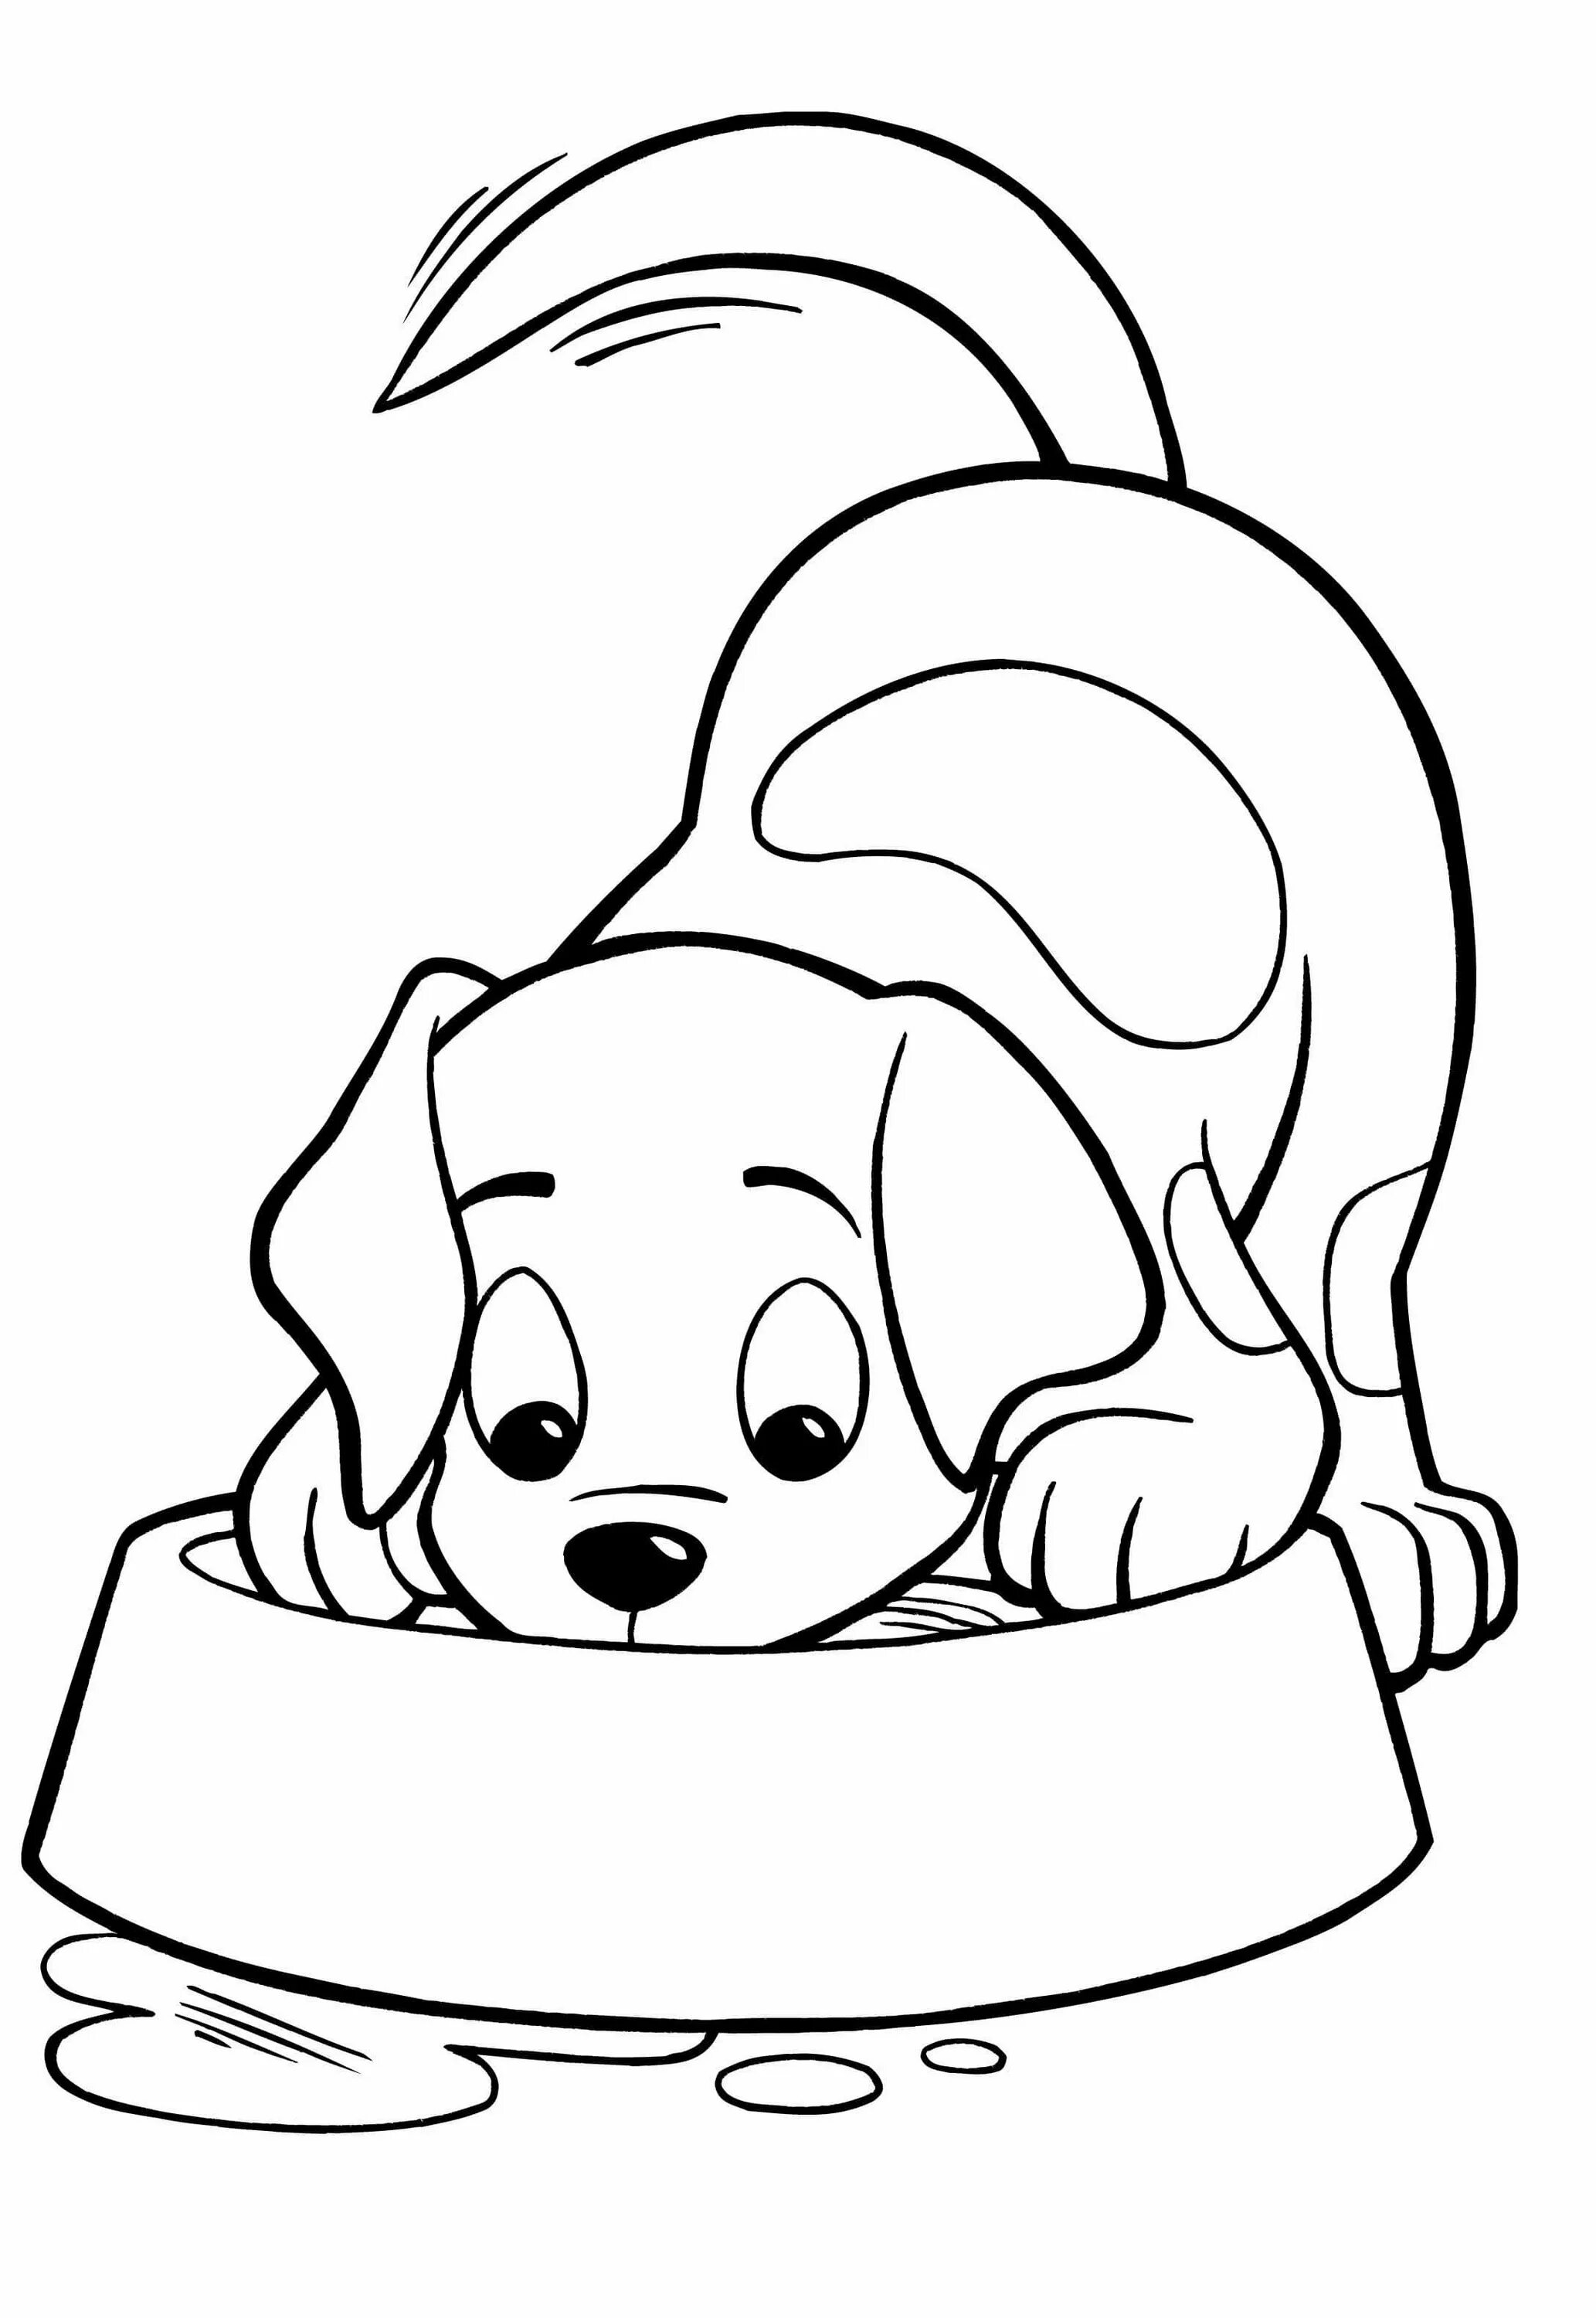 Puppy drawing #15